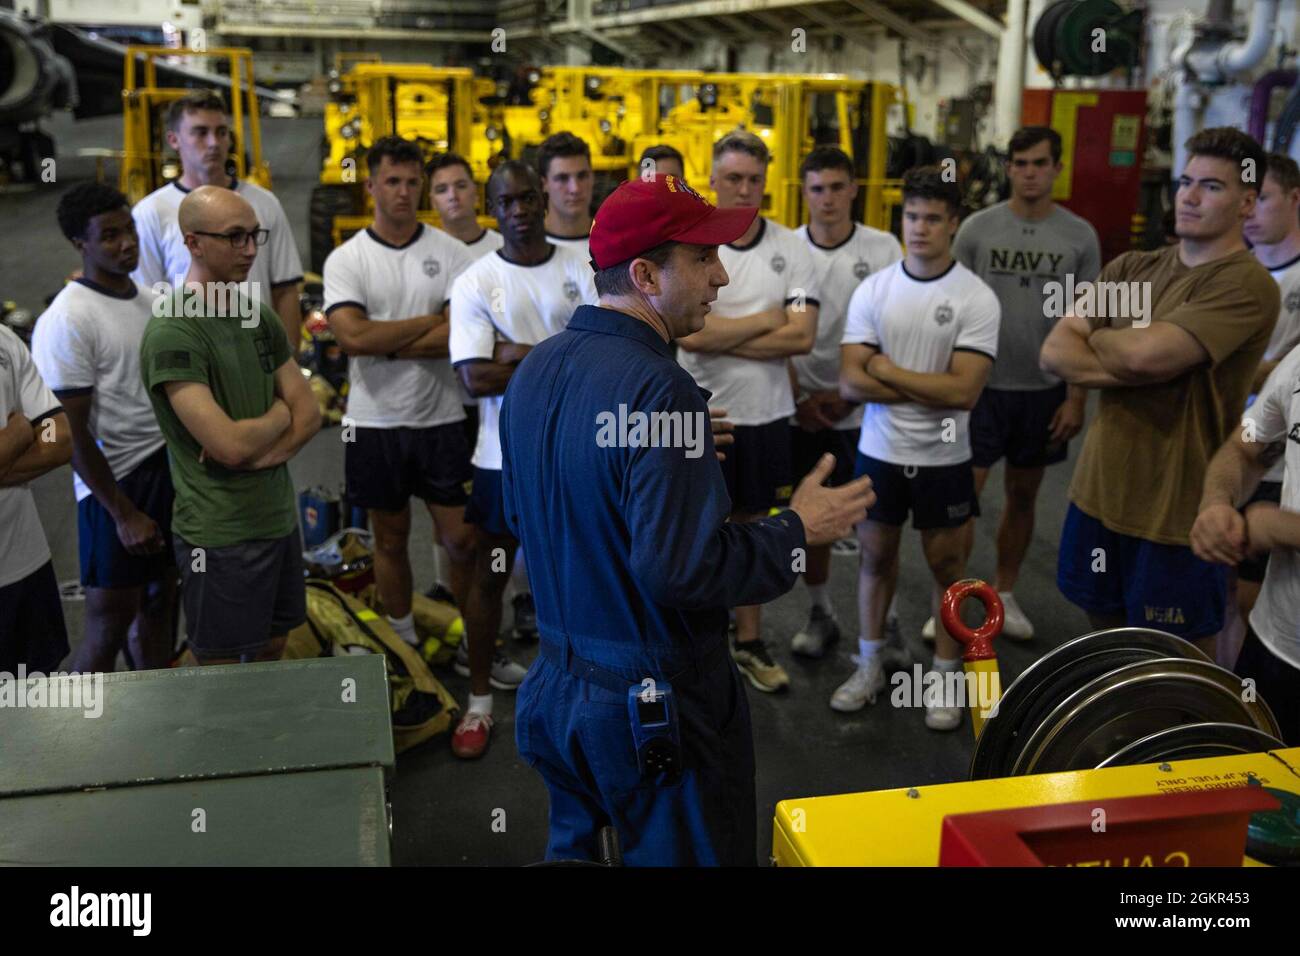 210617-N-TP544-4767 ATLANTIC OCEAN (June 17, 2021) Damage Controlman 1st Class Thomas Mittenzwei instructs U.S. Naval Academy Midshipmen on damage control techniques aboard the Wasp-class amphibious assault ship USS Kearsarge (LHD 3) June 17, 2021. Midshipmen are aboard Kearsarge as part of their annual summer cruise training, which provides the naval officers in training with contextual experiences to complement their classroom knowledge and helps them acclimate to life aboard a ship. Stock Photo